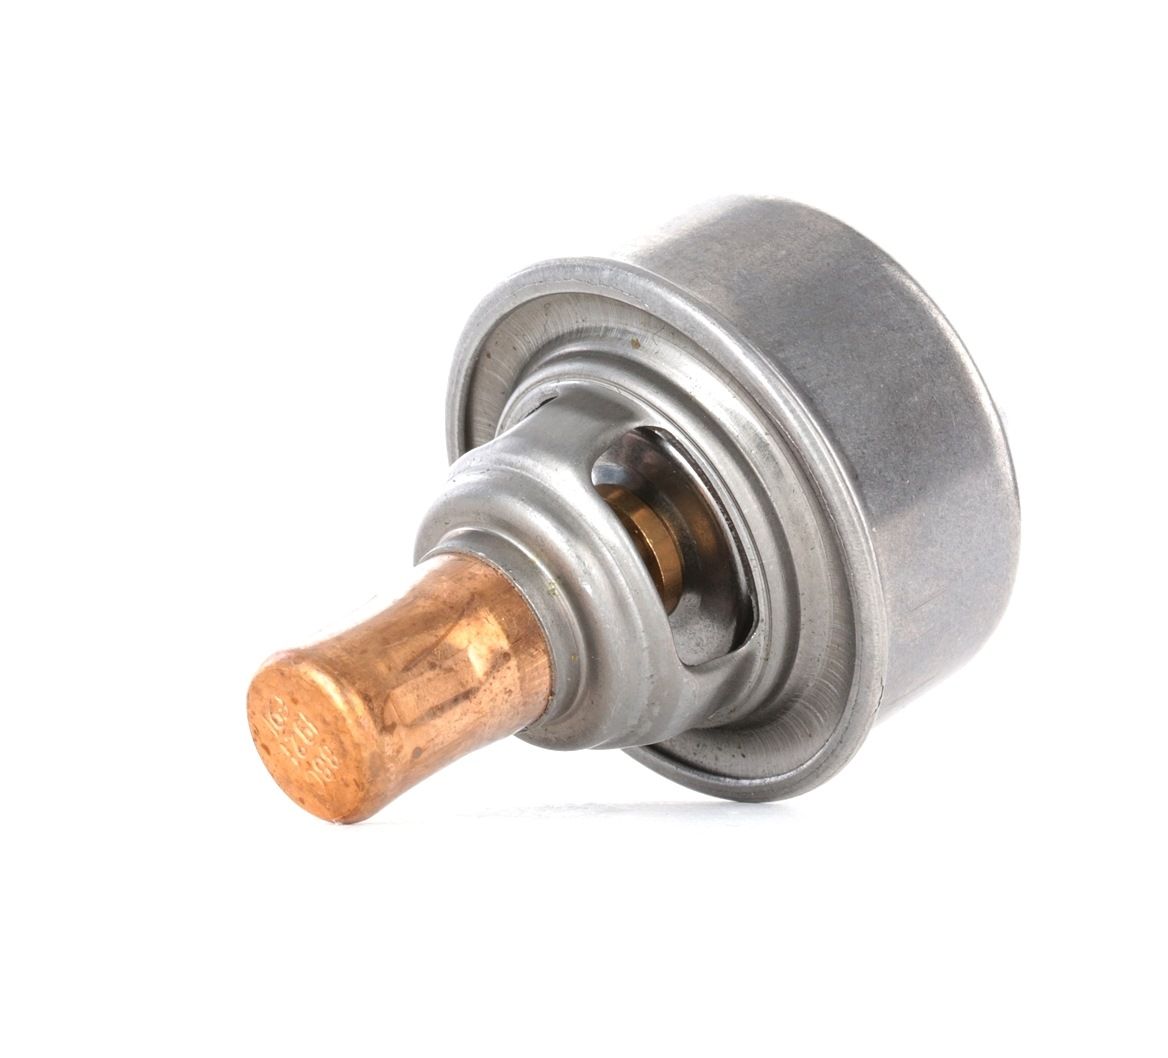 GATES TH01489 Engine thermostat Opening Temperature: 89°C, without housing